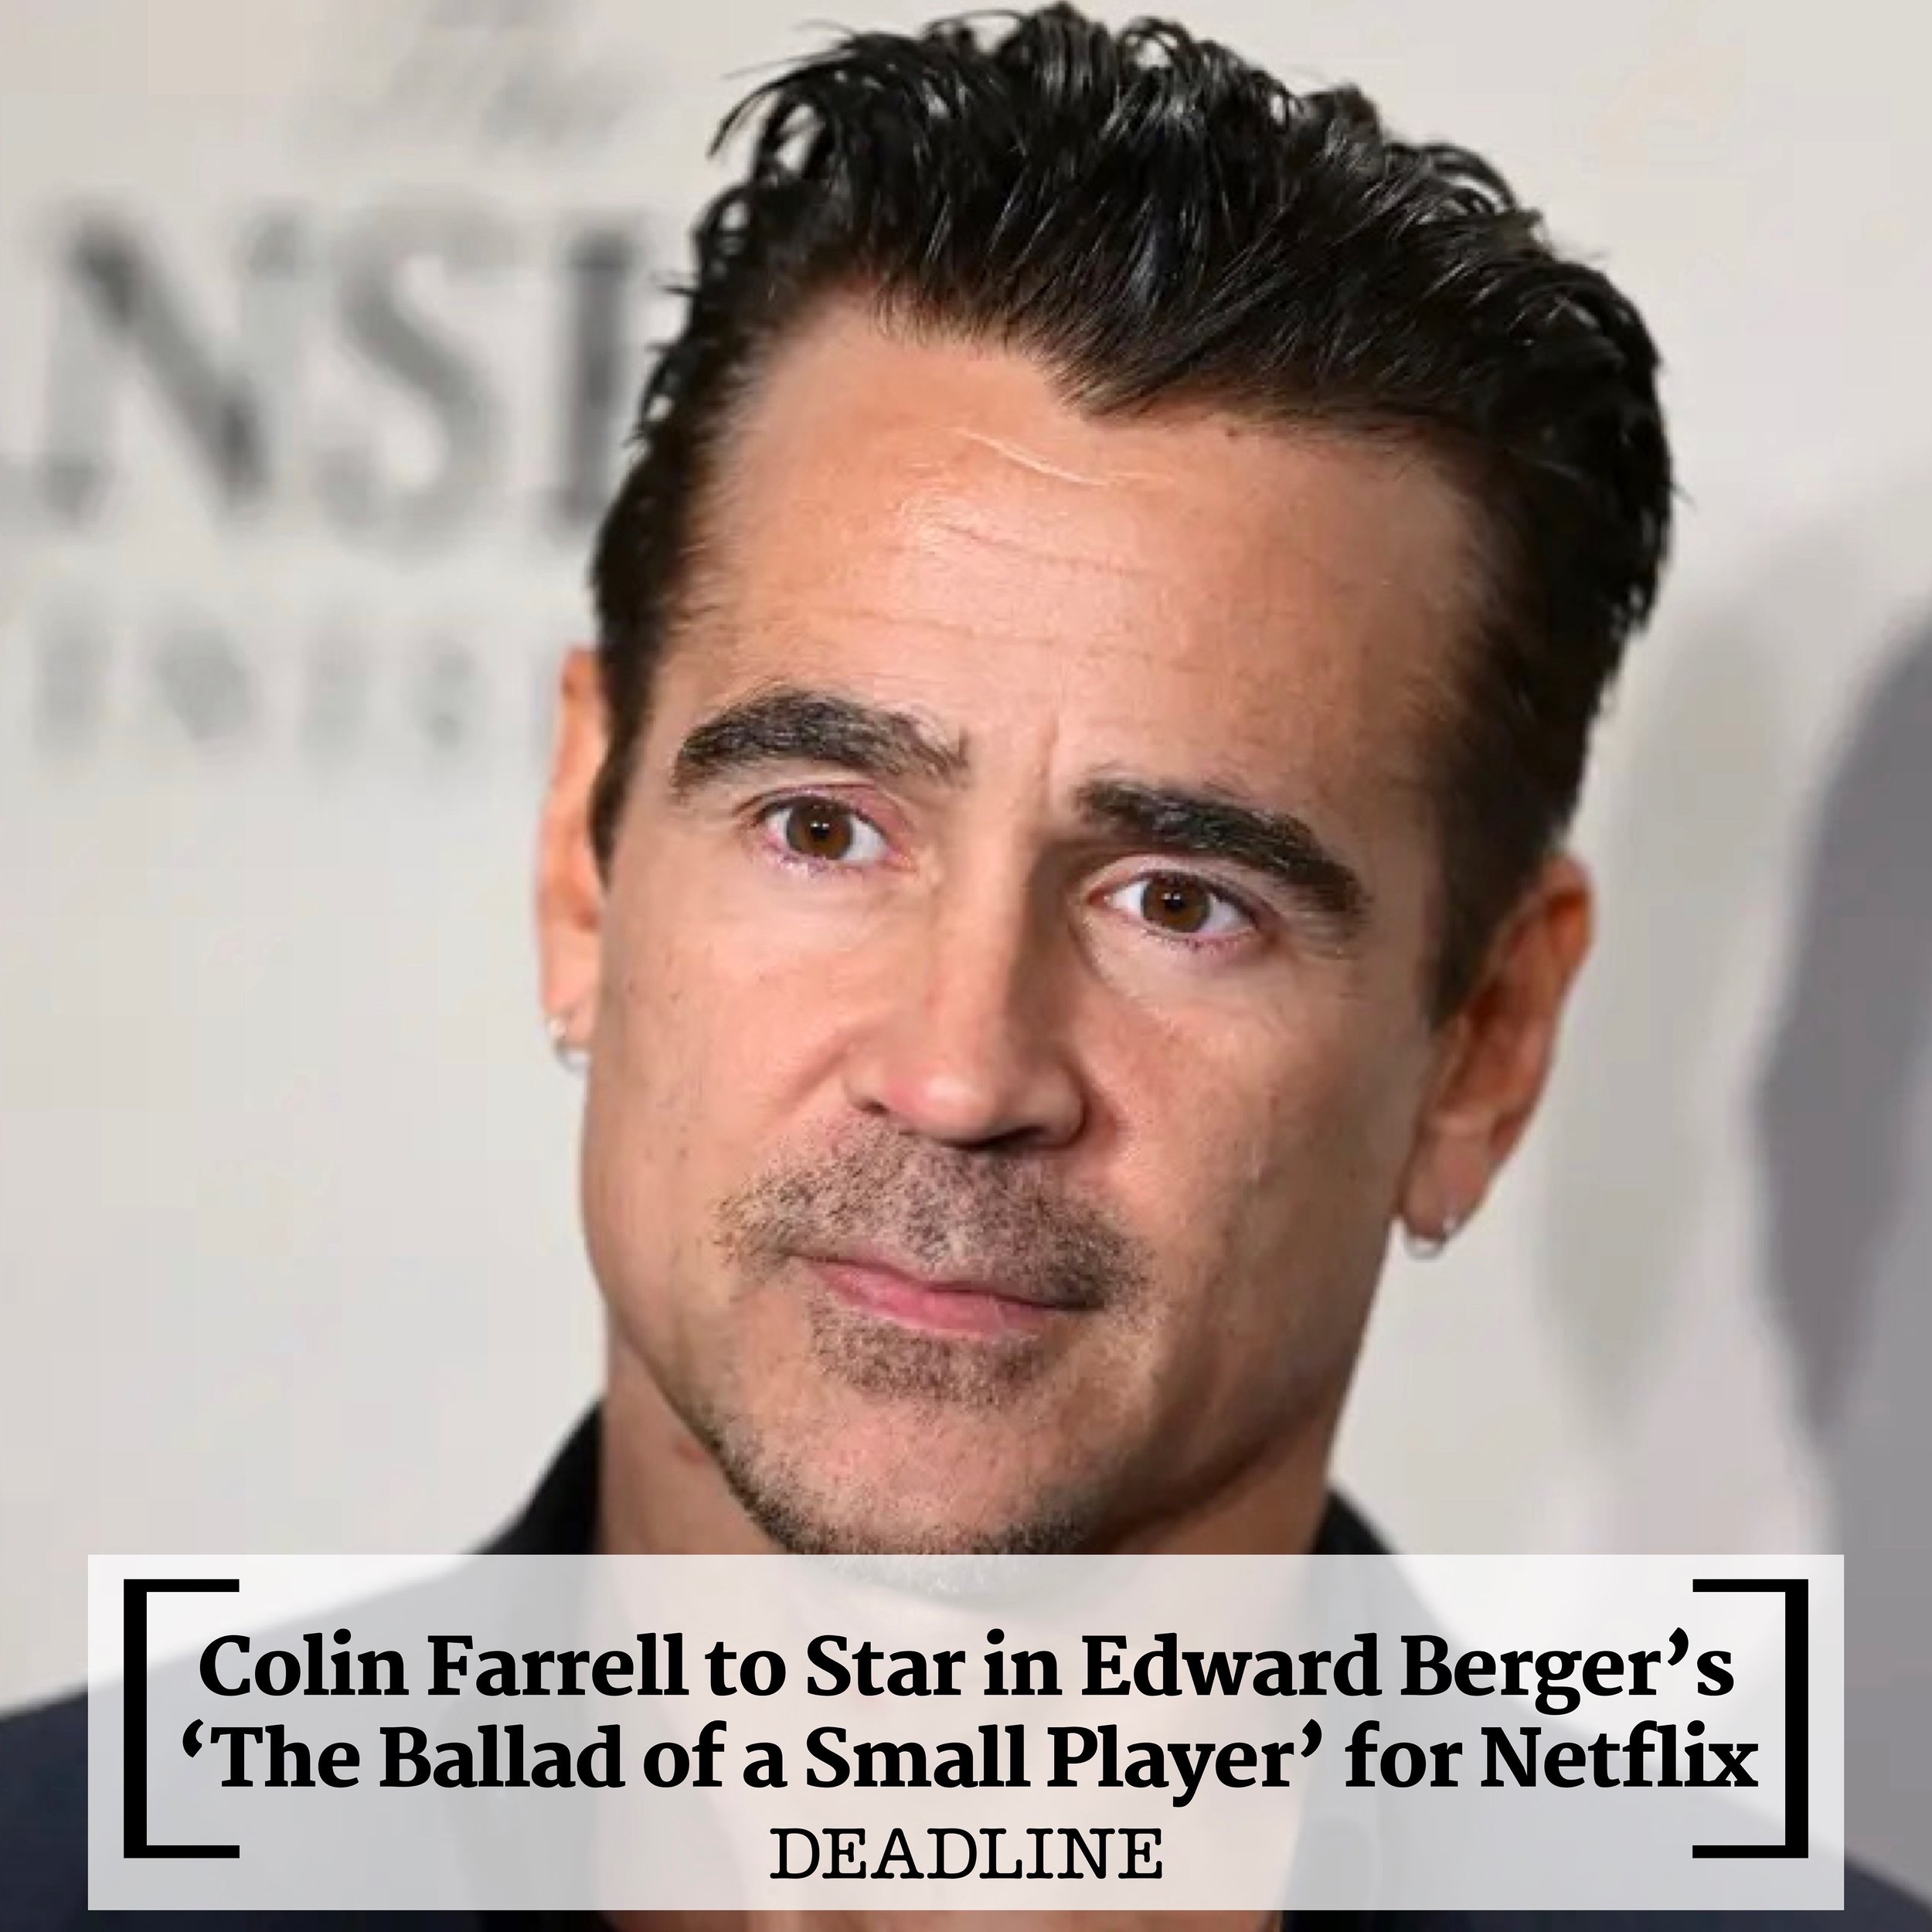 &ldquo;Colin Farrell continues to build on a busy dance card as the Oscar-nominated actor is set to star in Netflix&rsquo;s &lsquo;The Ballad of a Small Player,&rsquo; with Edward Berger directing,&rdquo; reported by @deadline! 📺📰 #ColinFarrell #Ne